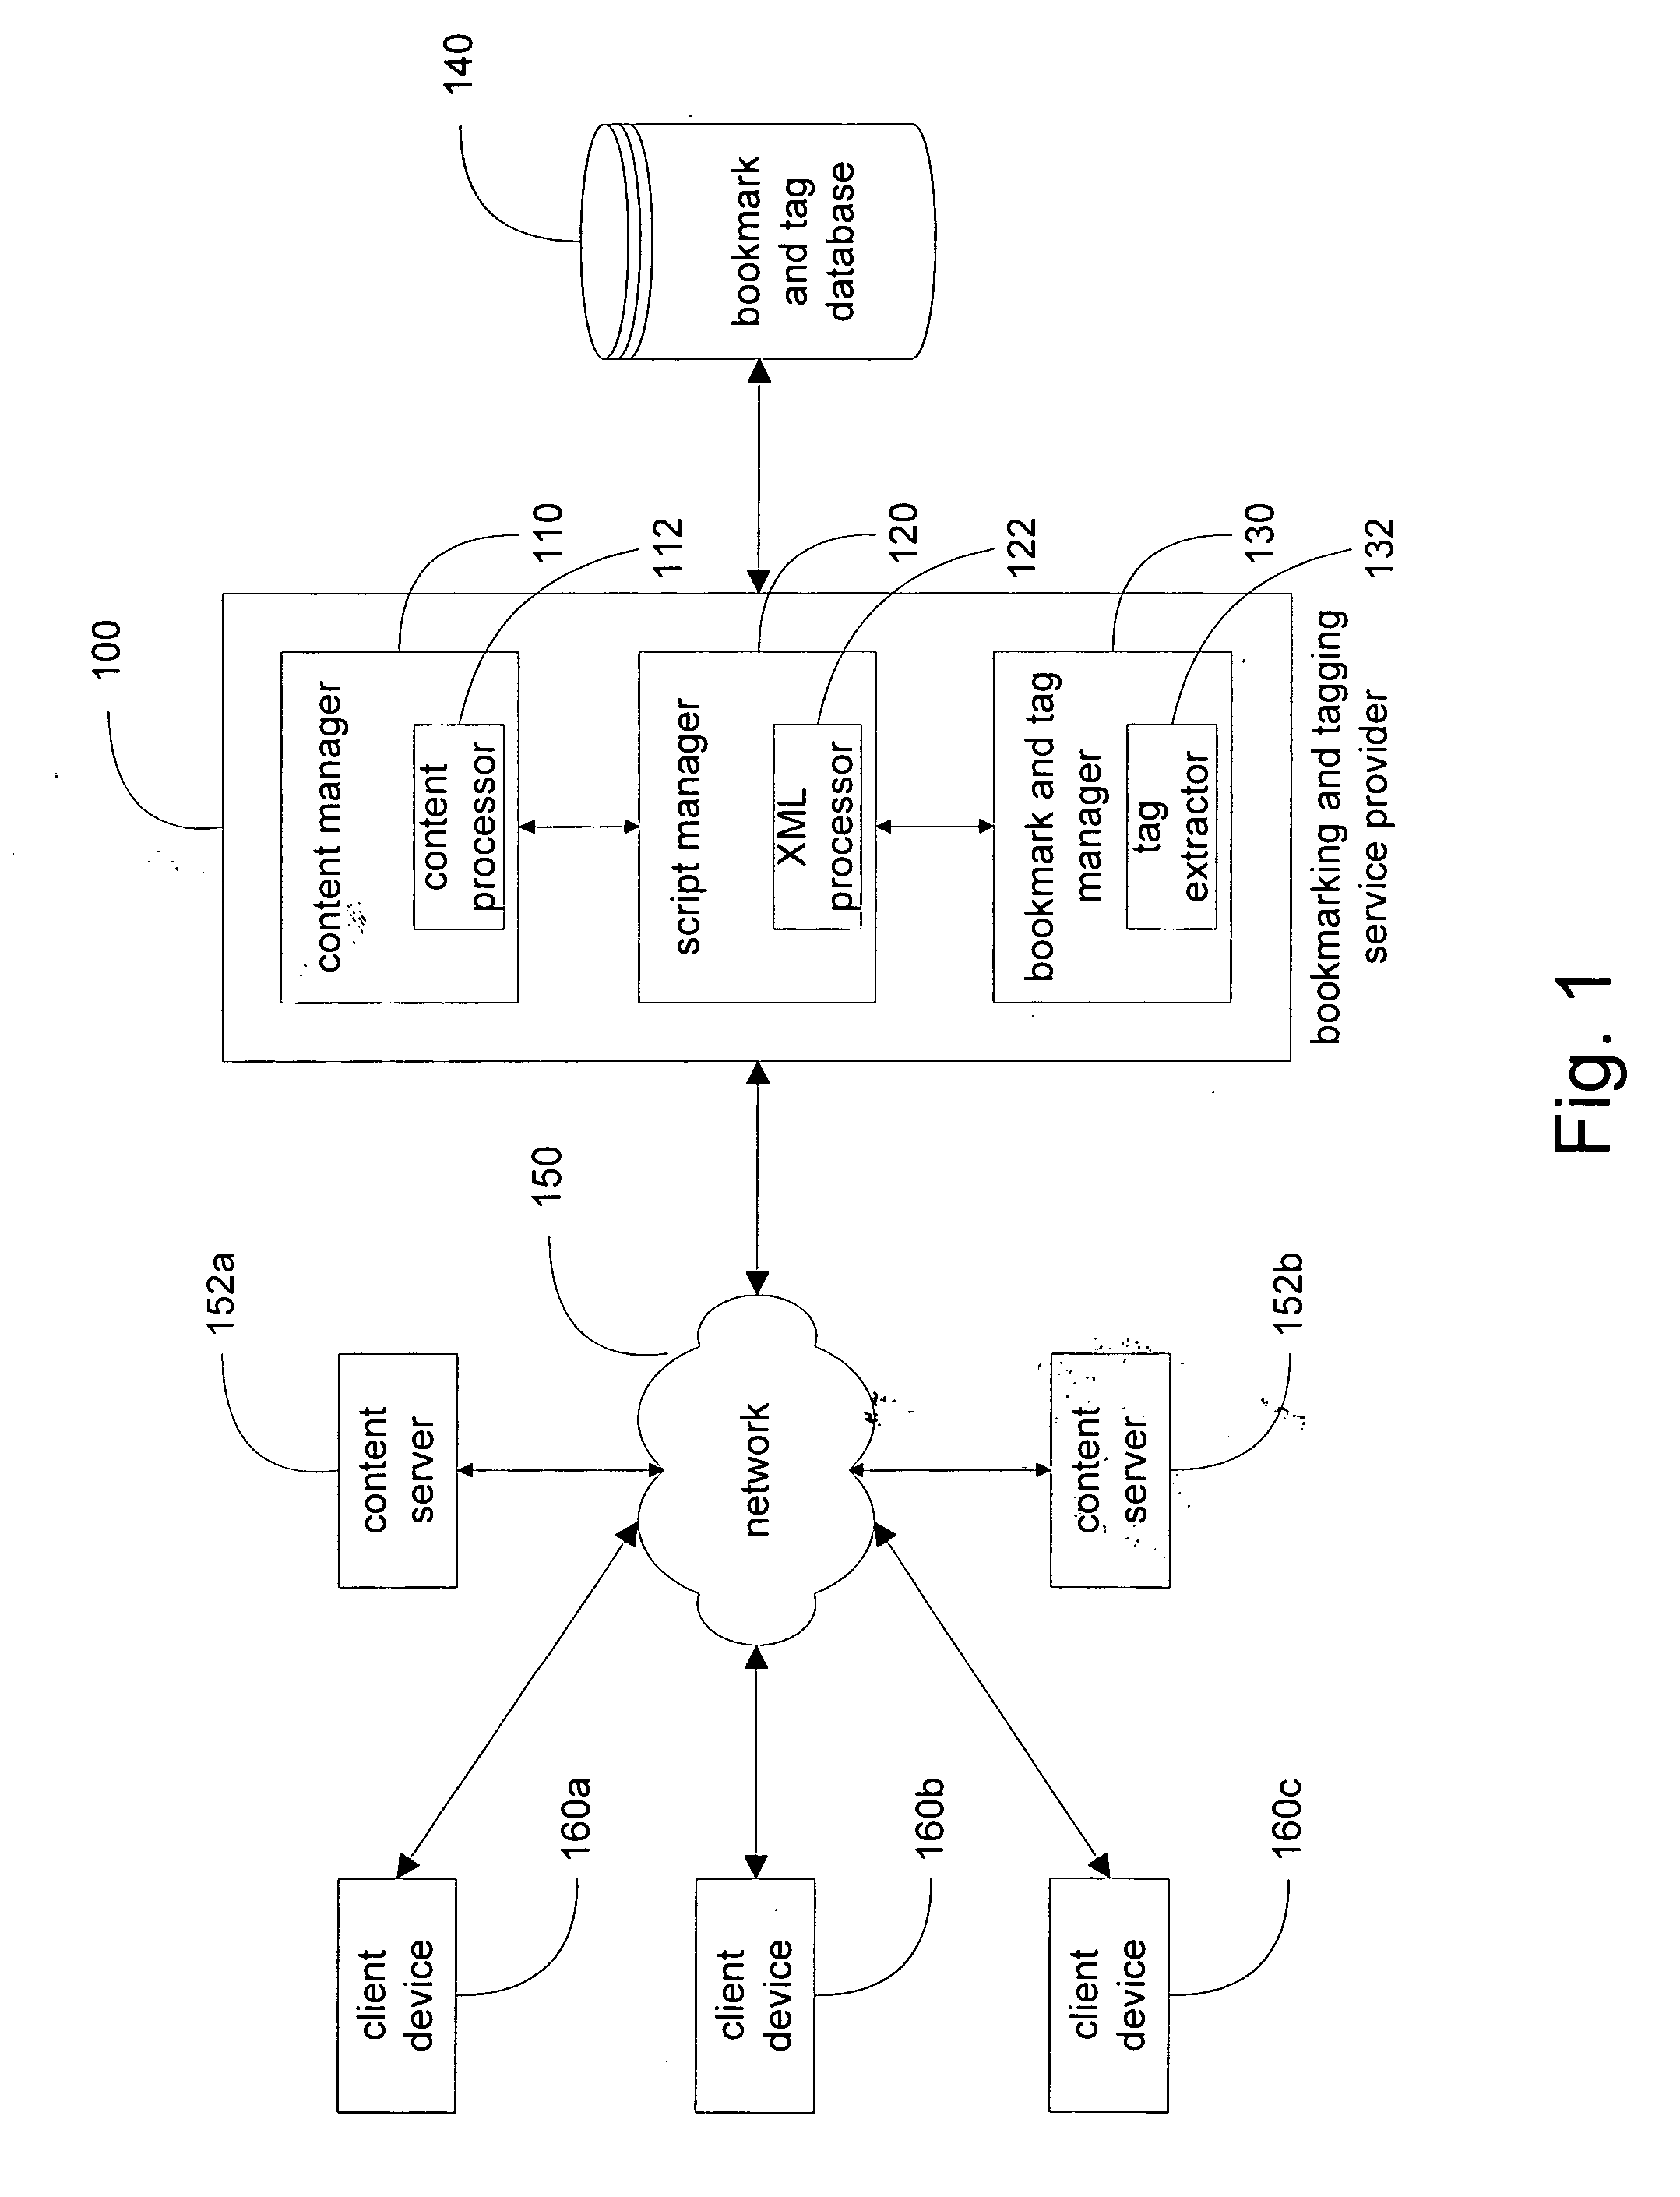 System and method for bookmarking and auto-tagging a content item based on file type